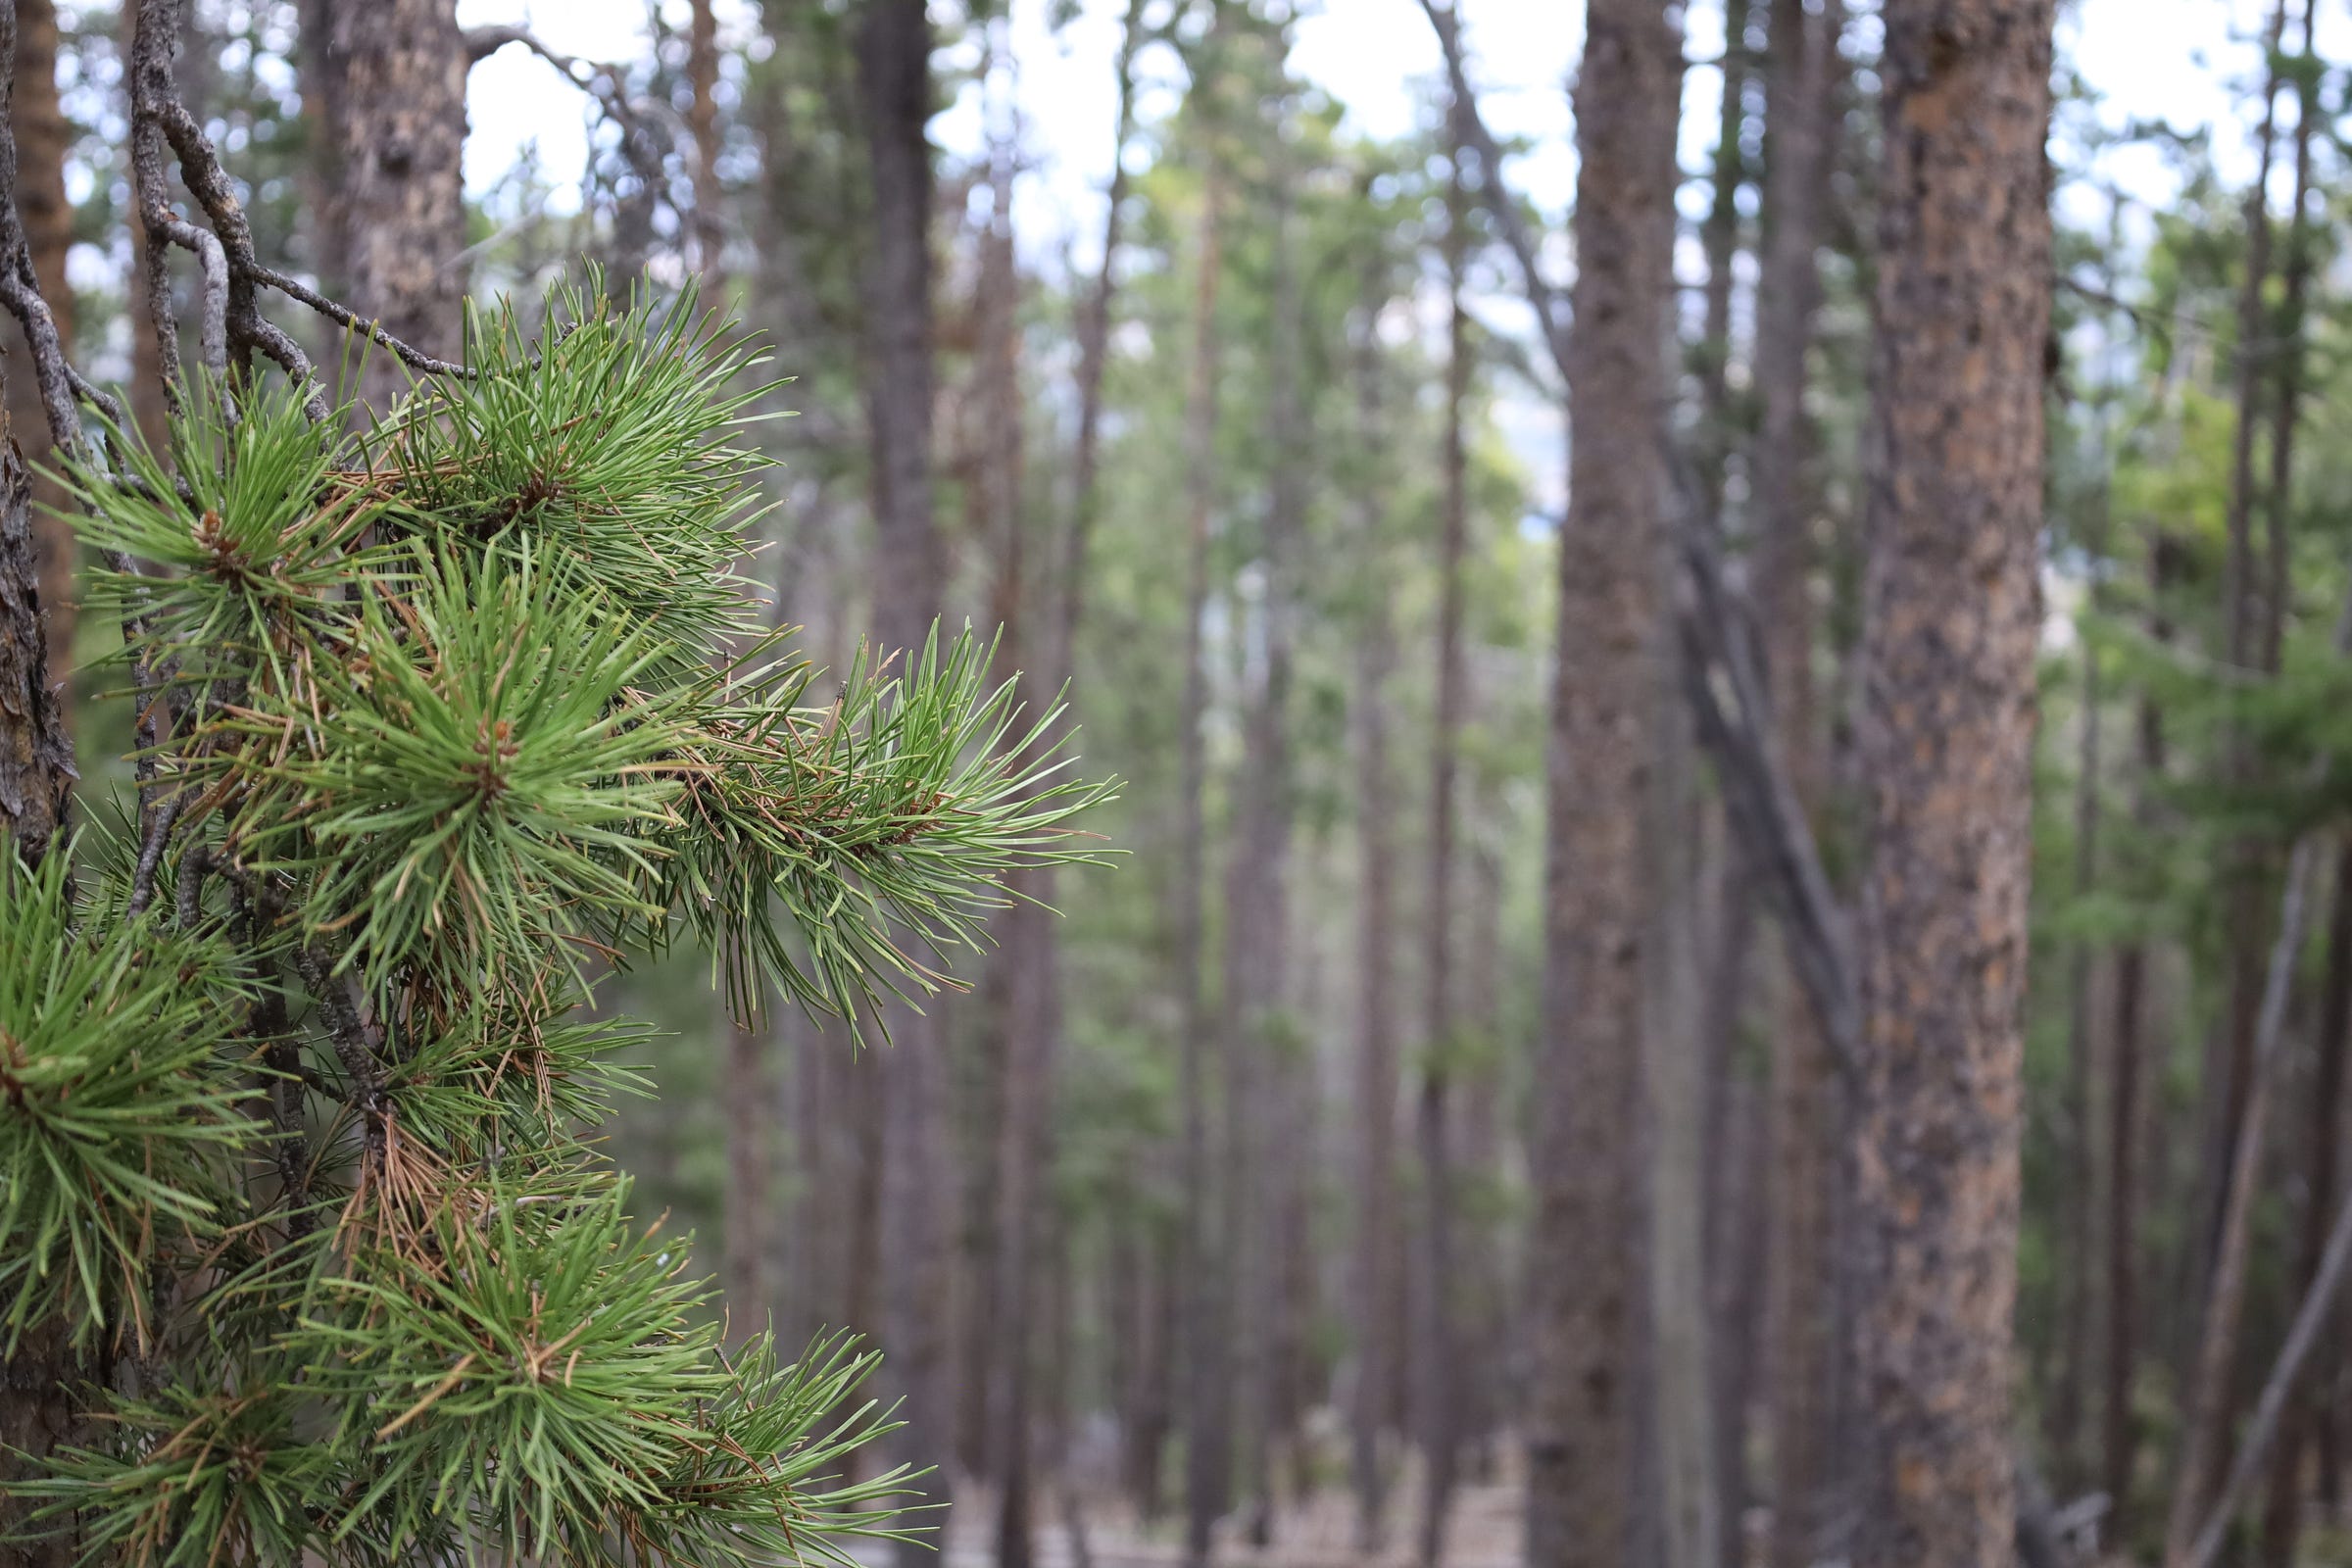 a cluster of pine needles sprout from the trunk of a ponderosa pine. In the background, there is a sprawling forest of tall pine trees, out of focus